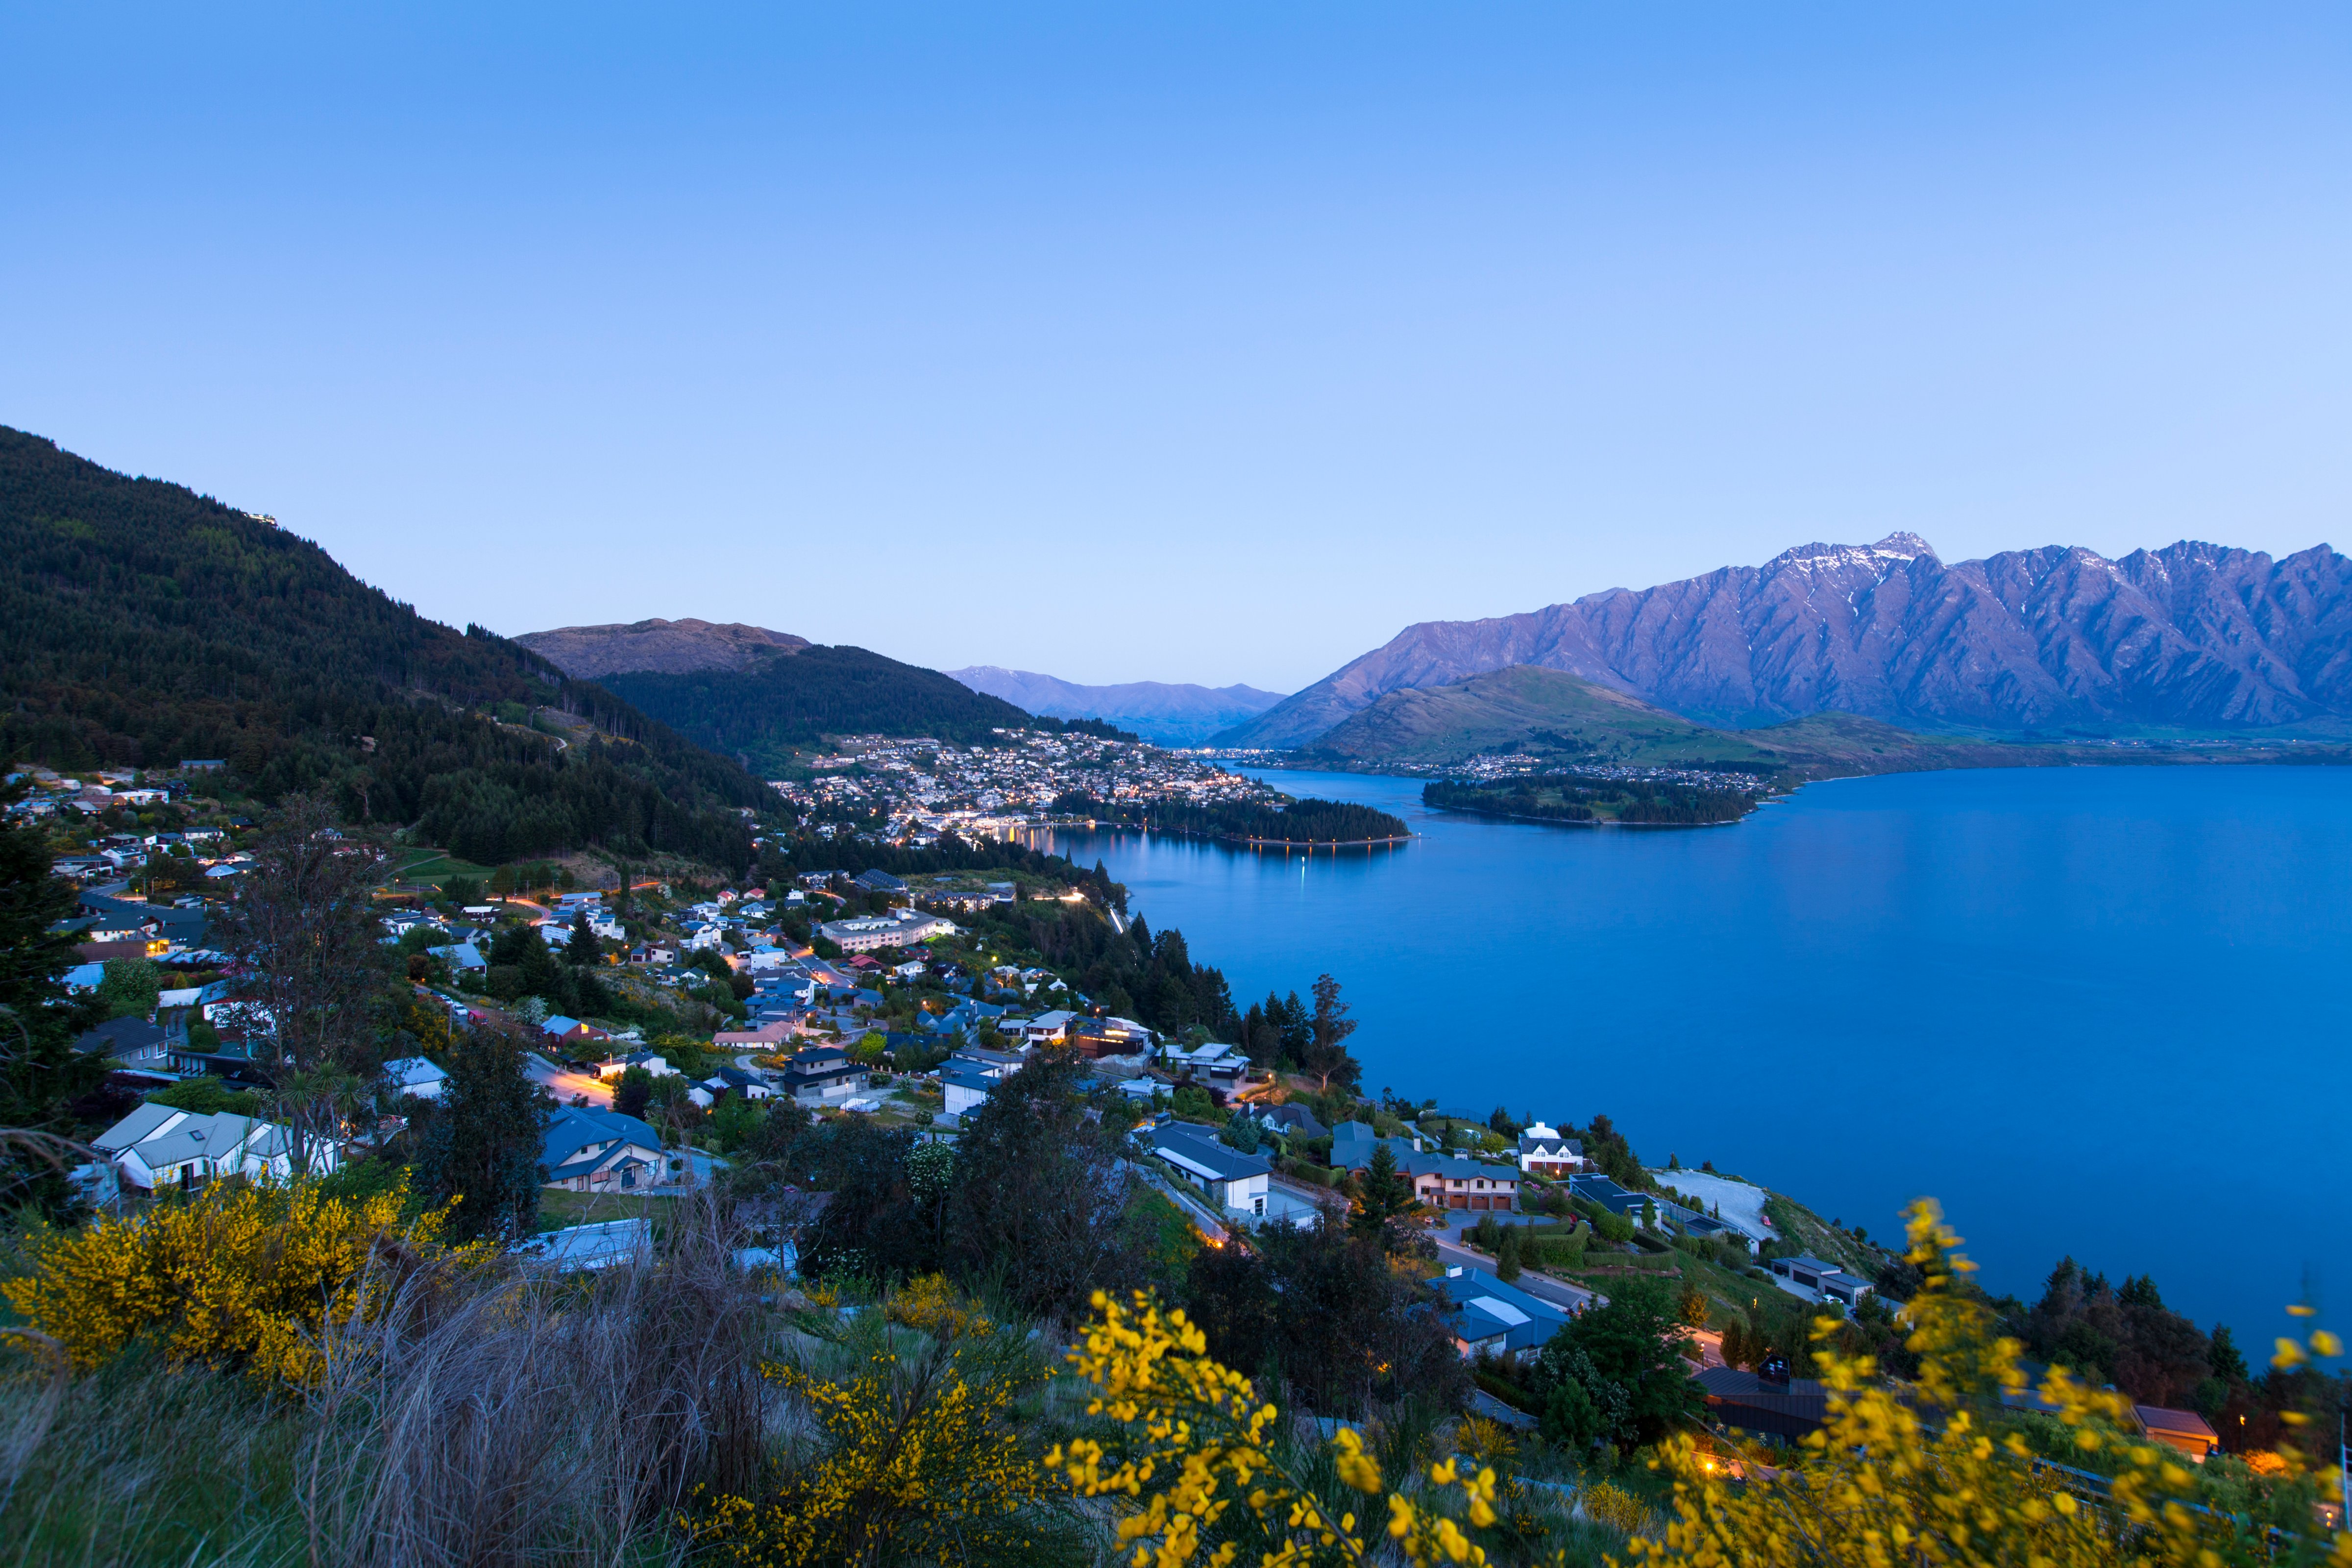 Sunset over Queenstown on Lake Wakatipu, New Zealand (zstockphotos—Getty Images / iStockphoto)